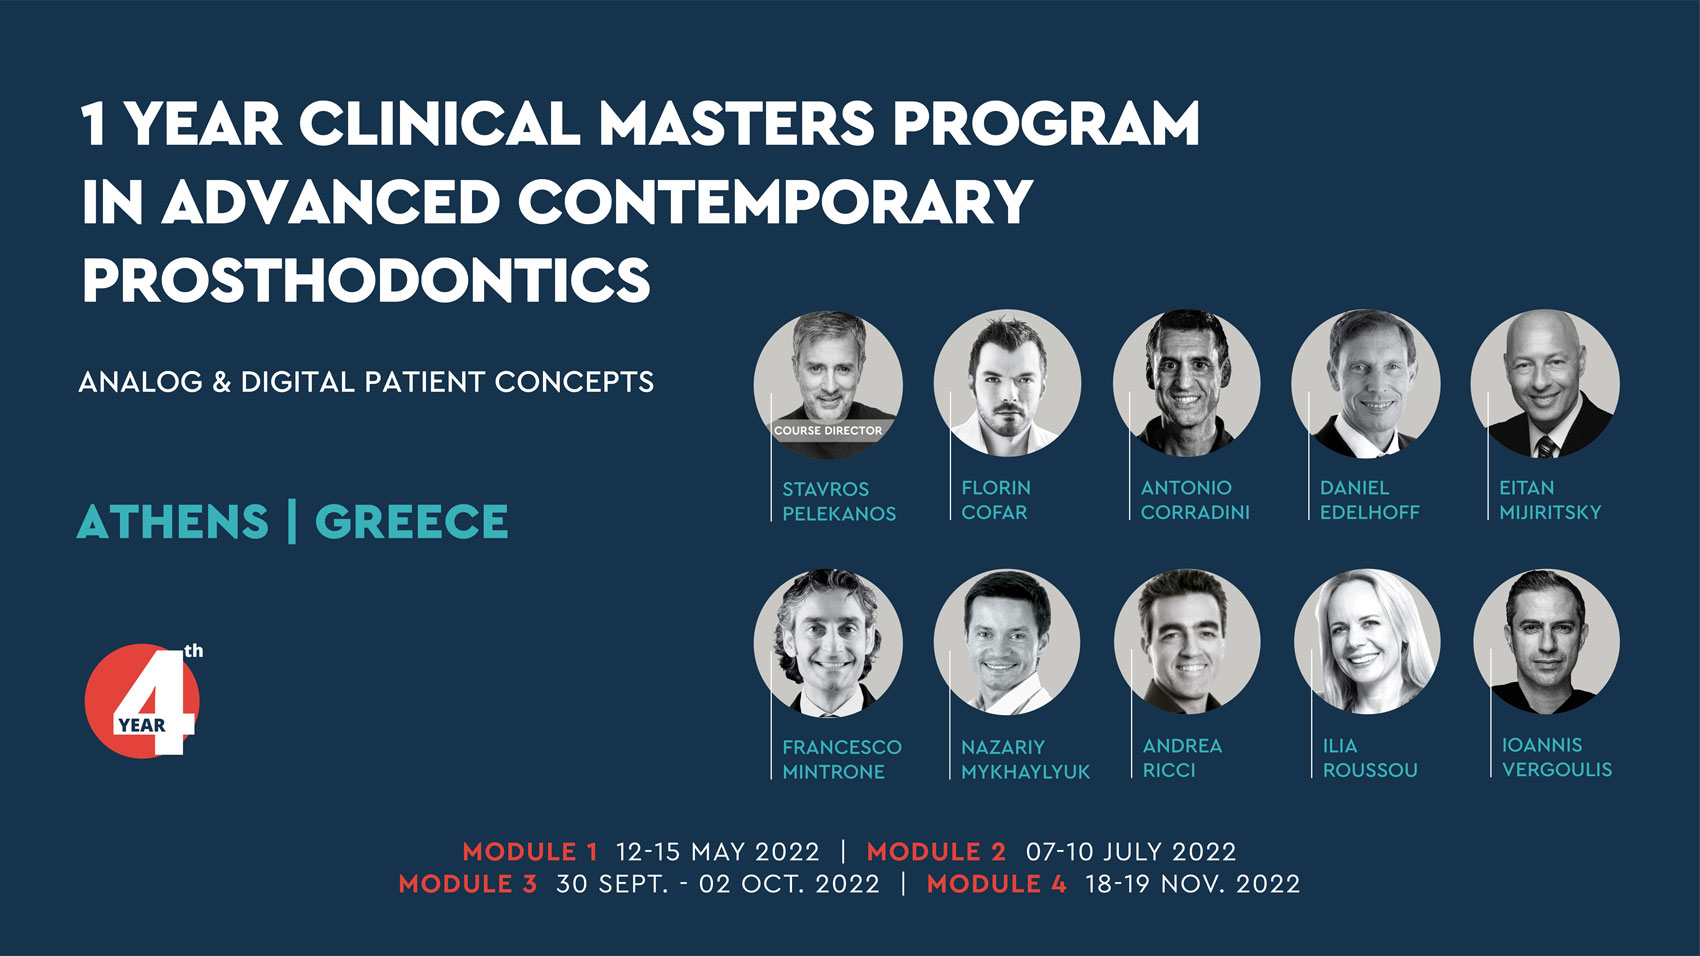 1 Year Clinical Masters Program in Advanced Contemporary Prosthodontics